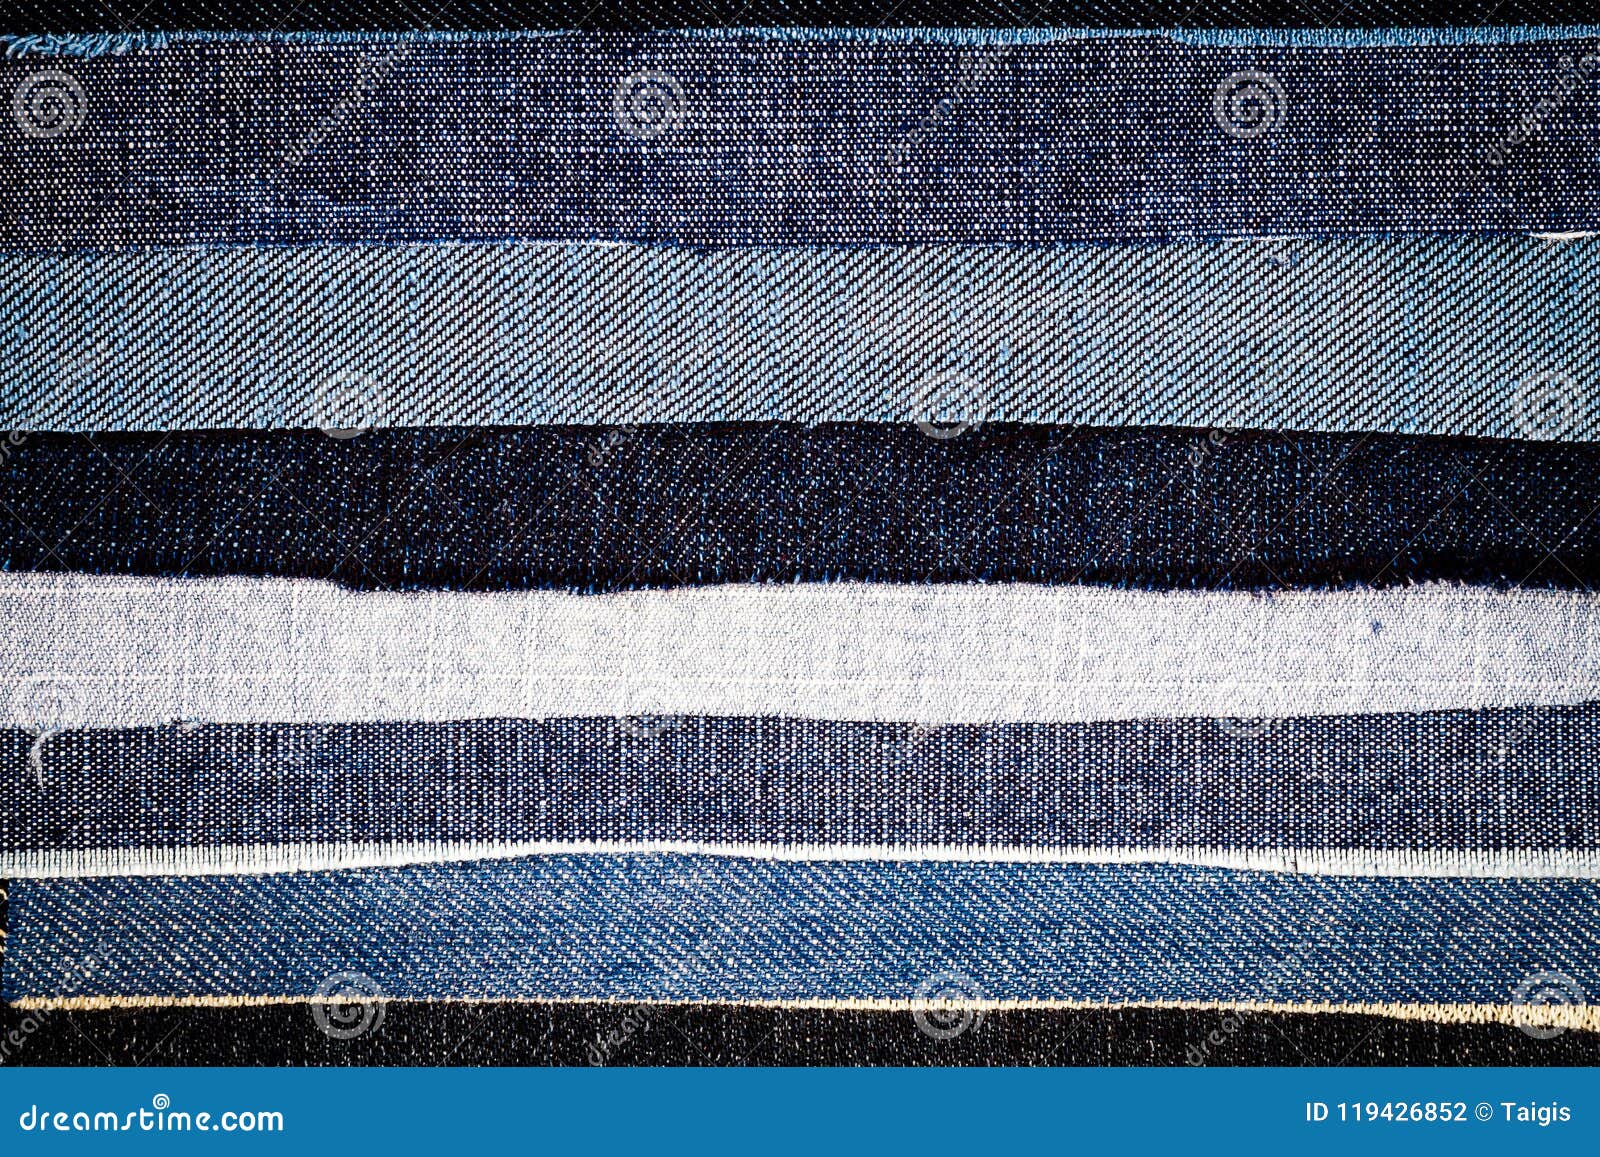 Abstract Different Jeans Stripes Texture Background Stock Photo - Image ...